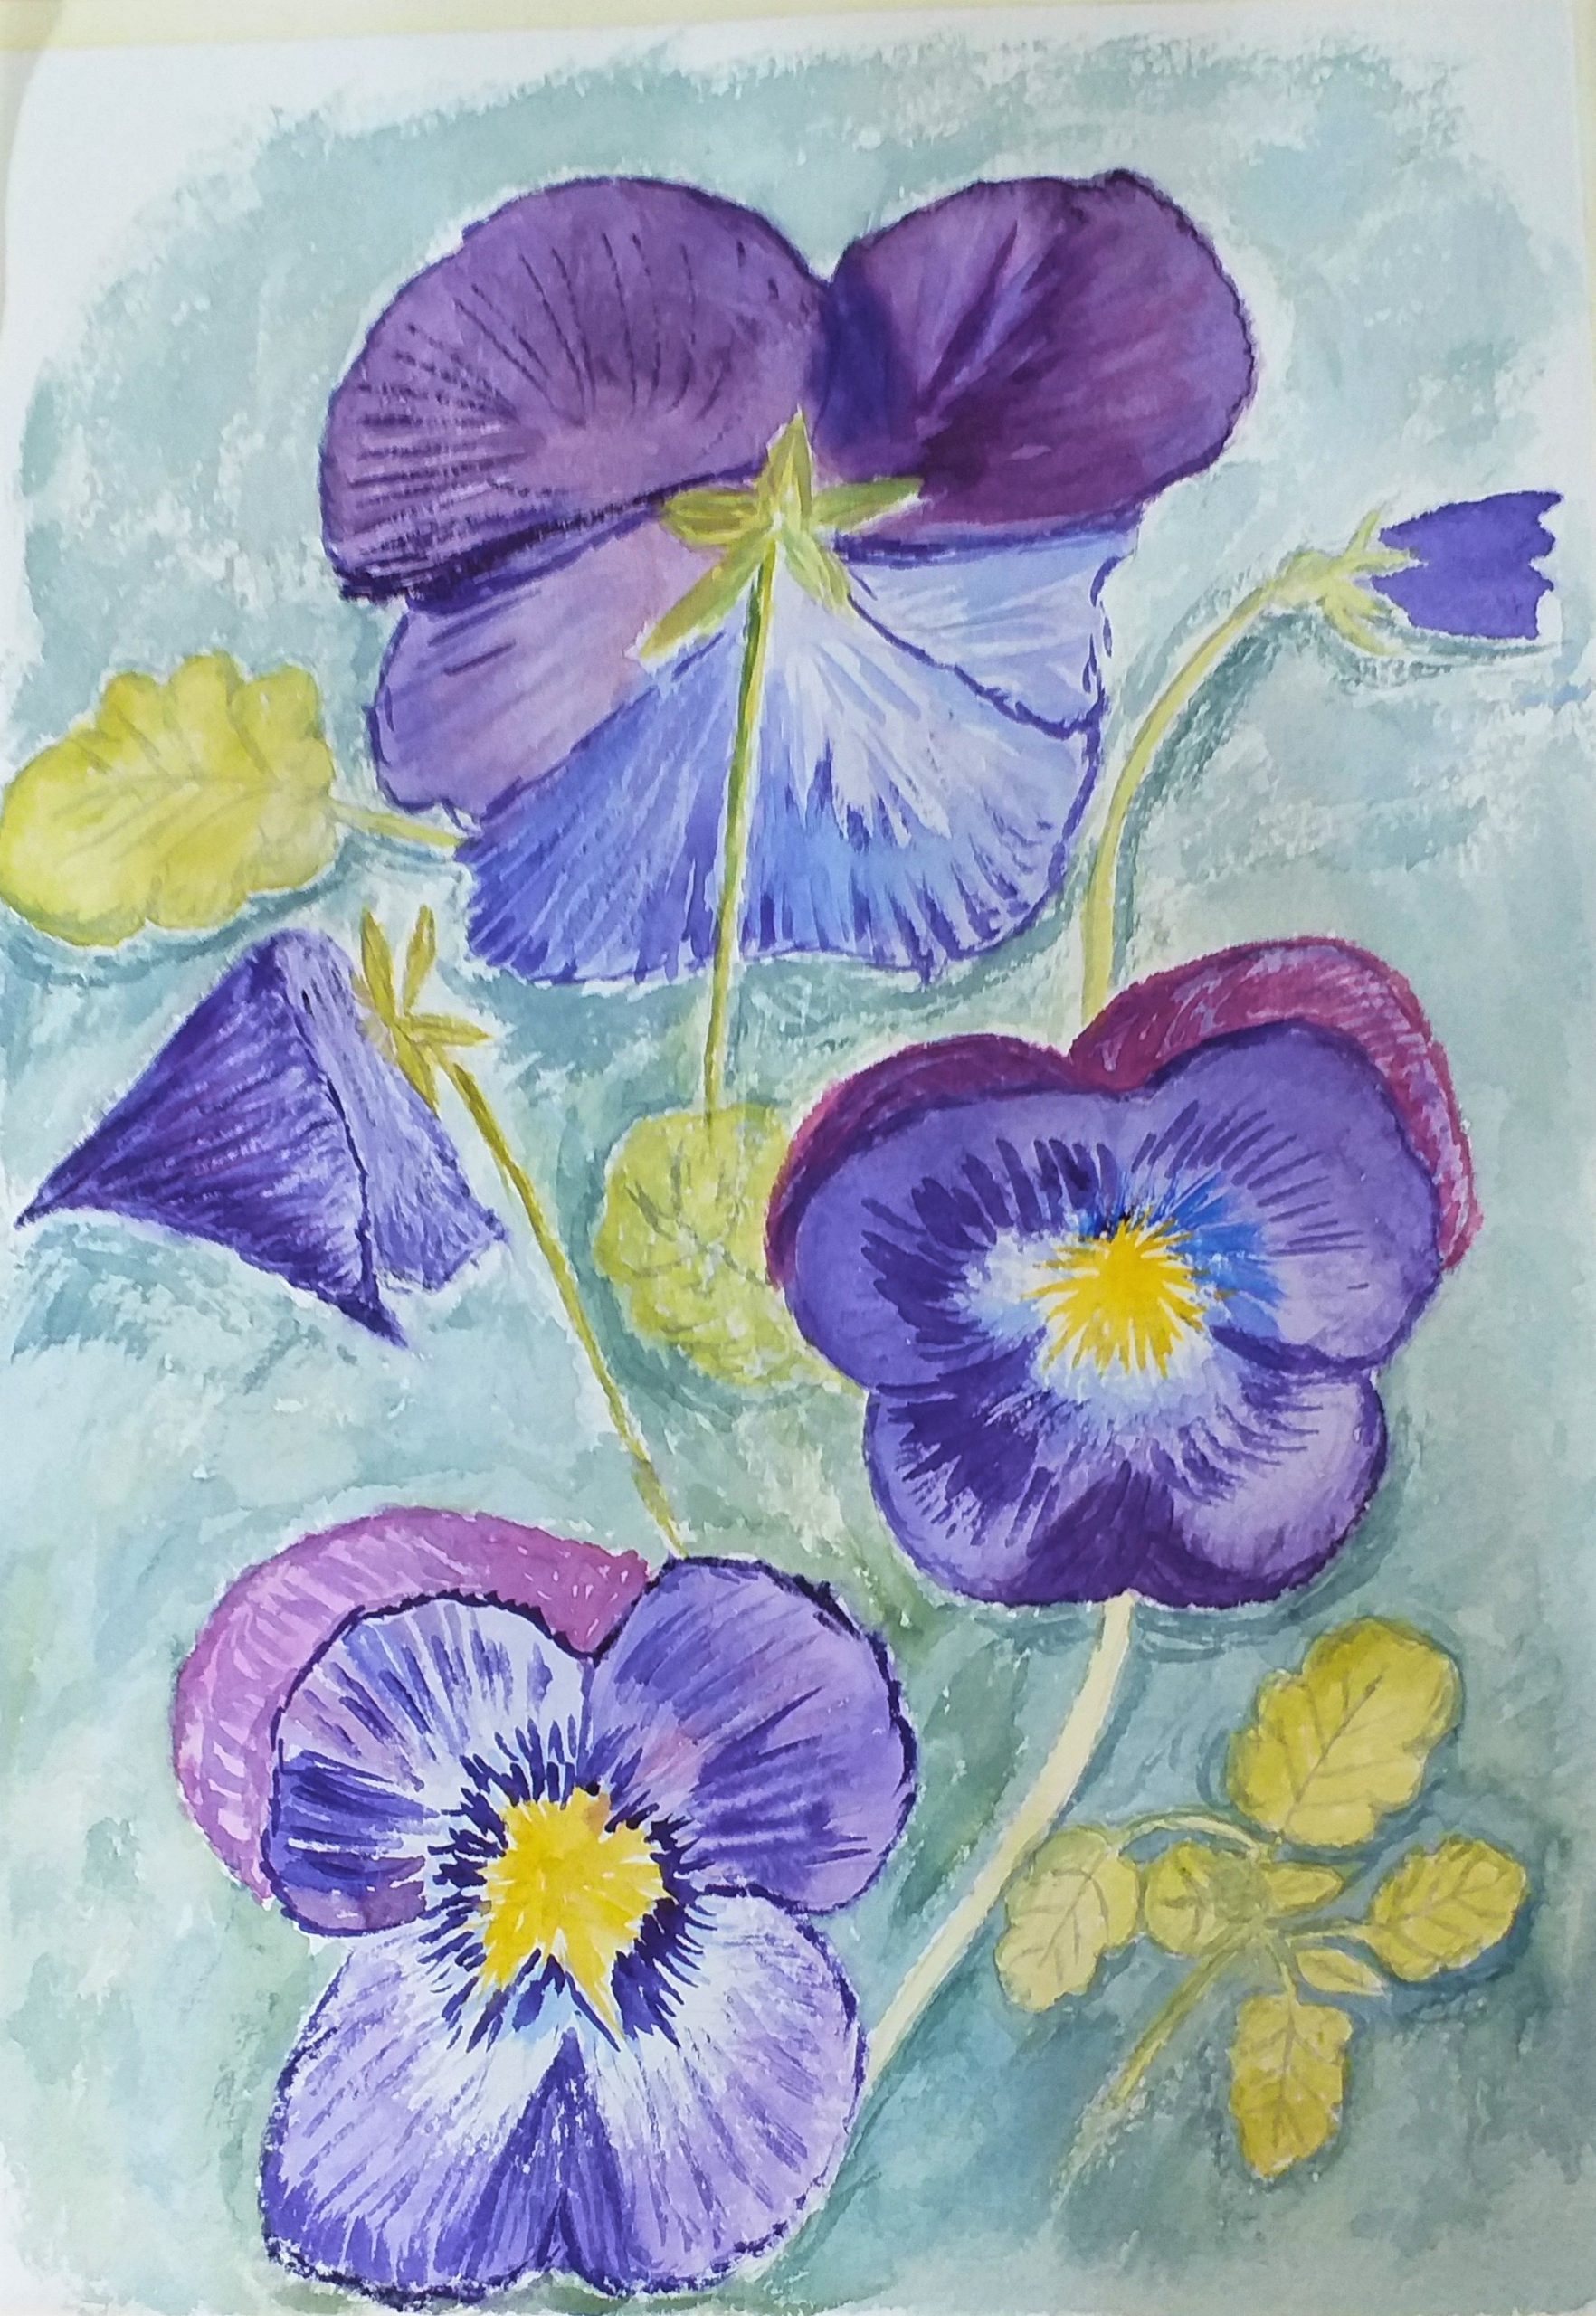 Therapeutic Watercolour Painting at Magic Wool Art and Craft Studio